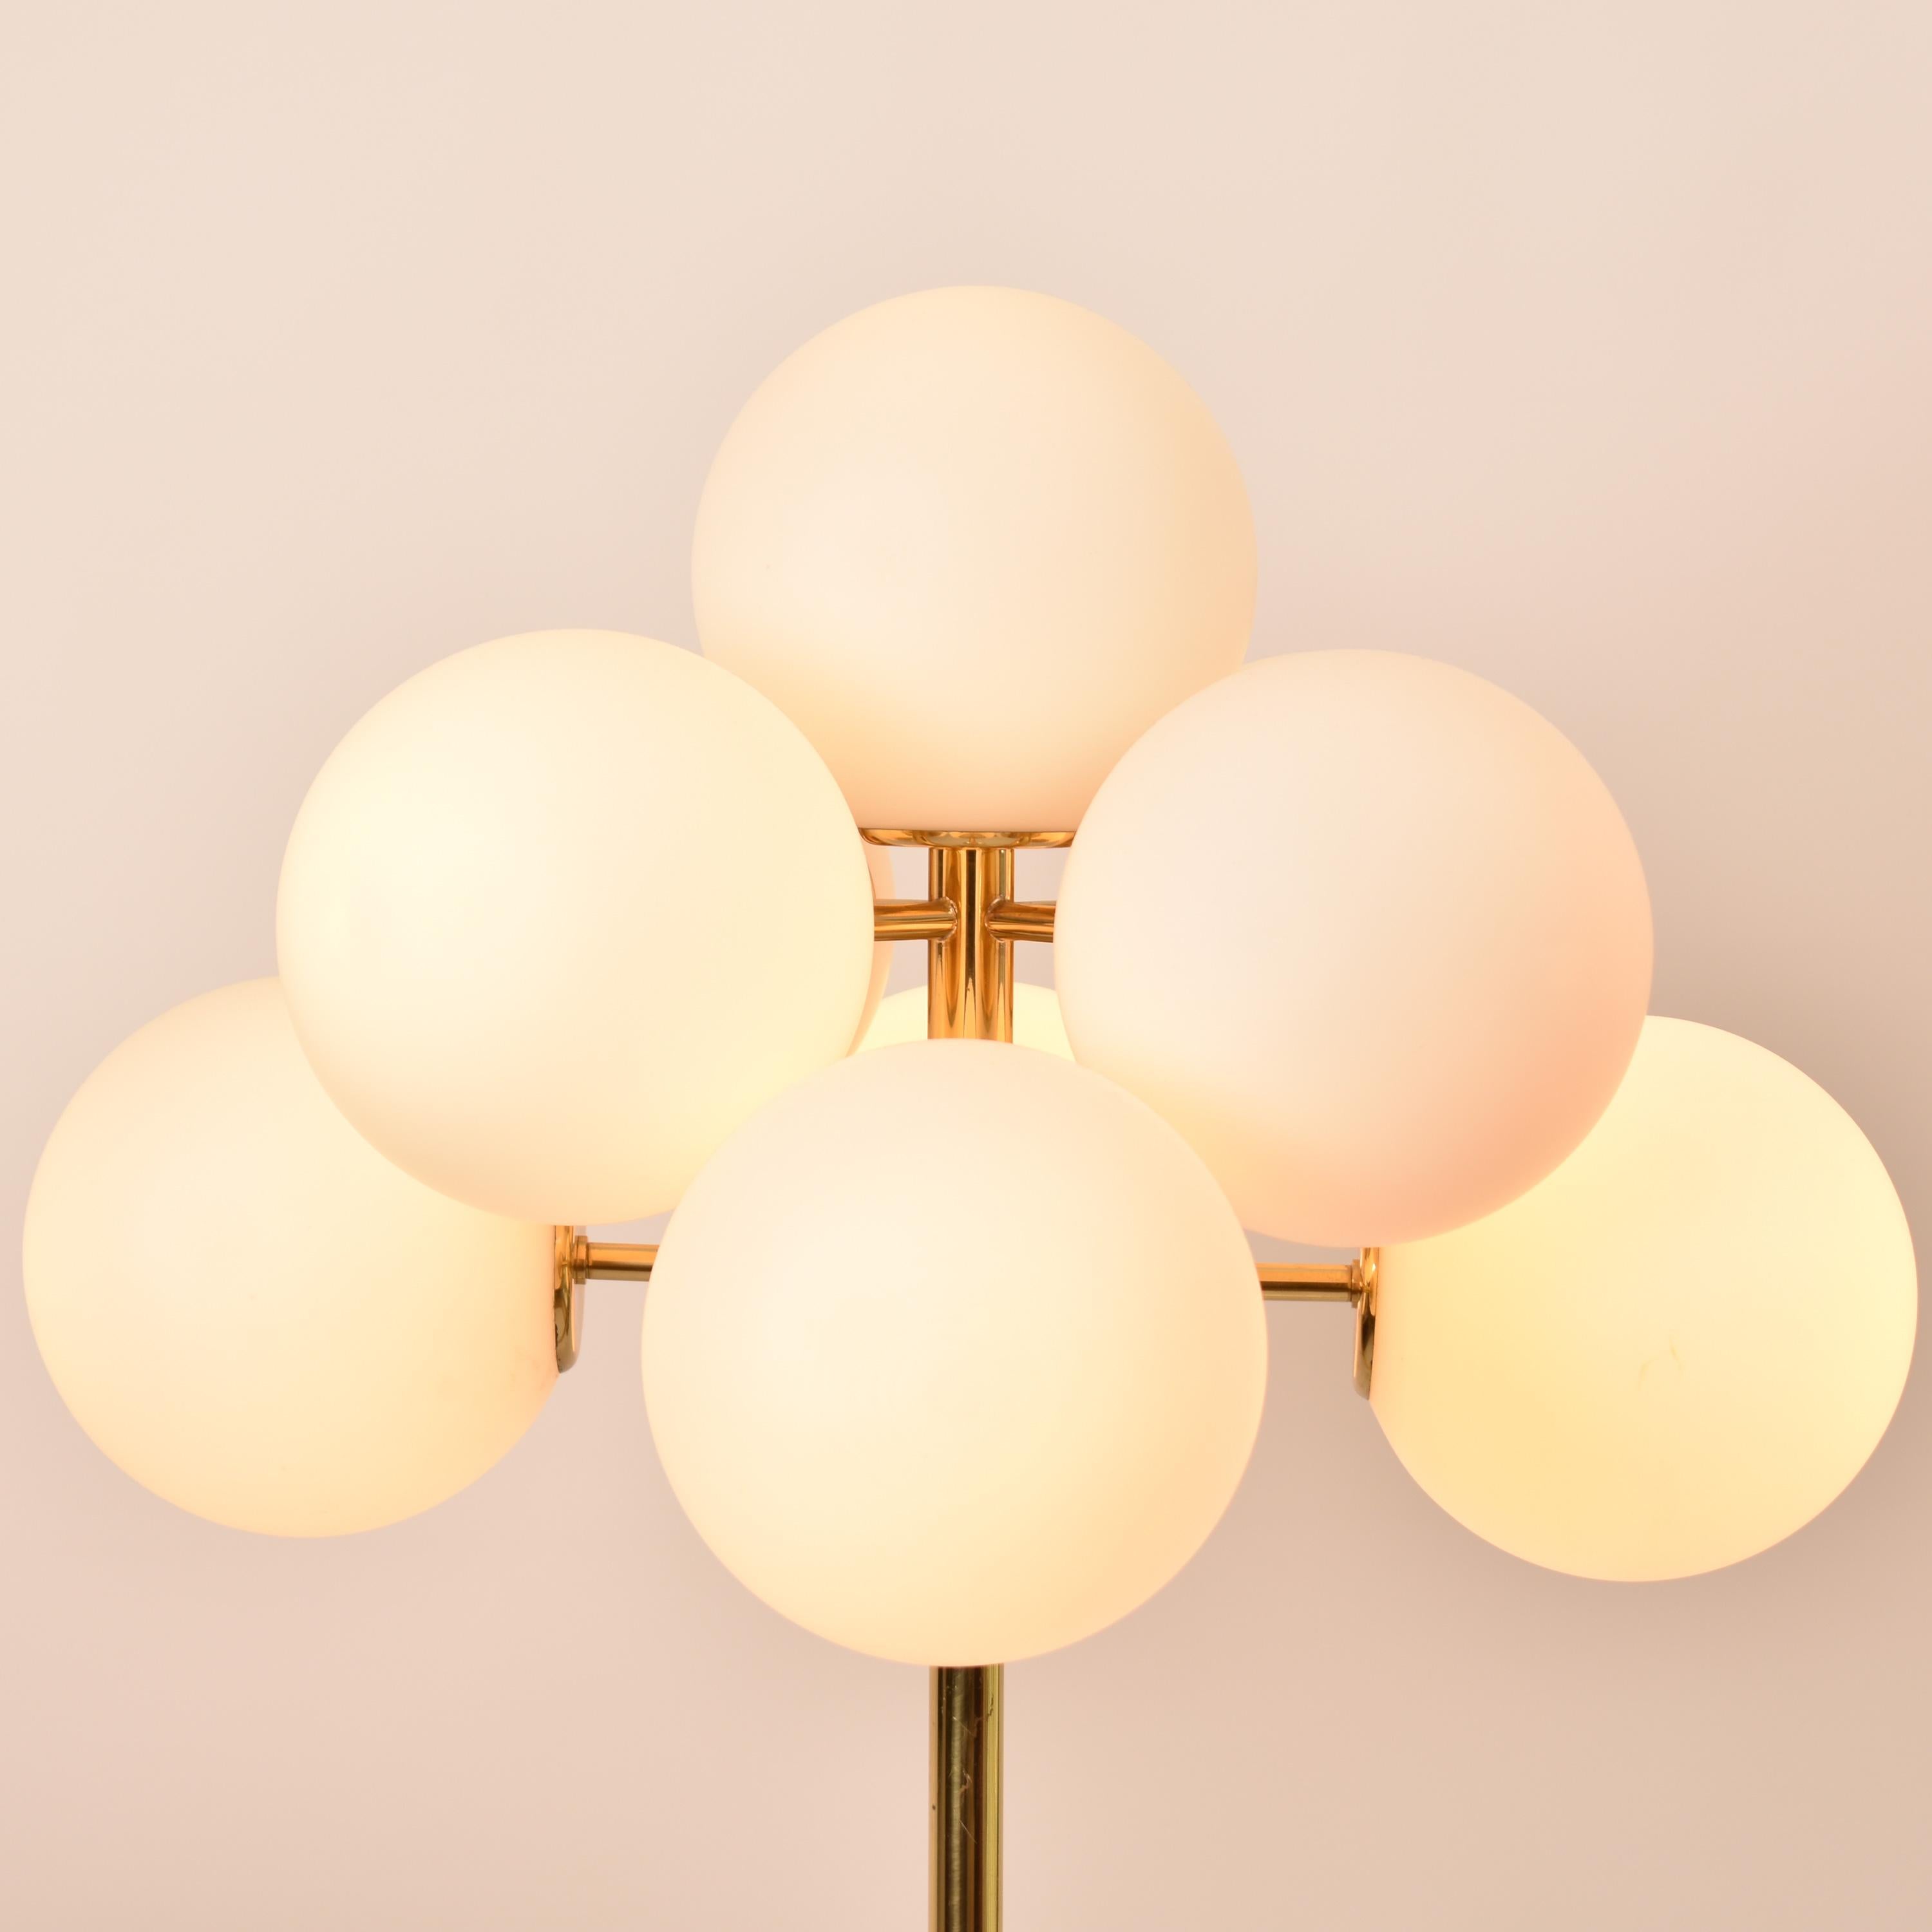 Mid-20th Century Mid-Century Modern Atomic Floor Lamp Gold and White By E.R. Nele for Temde 1960